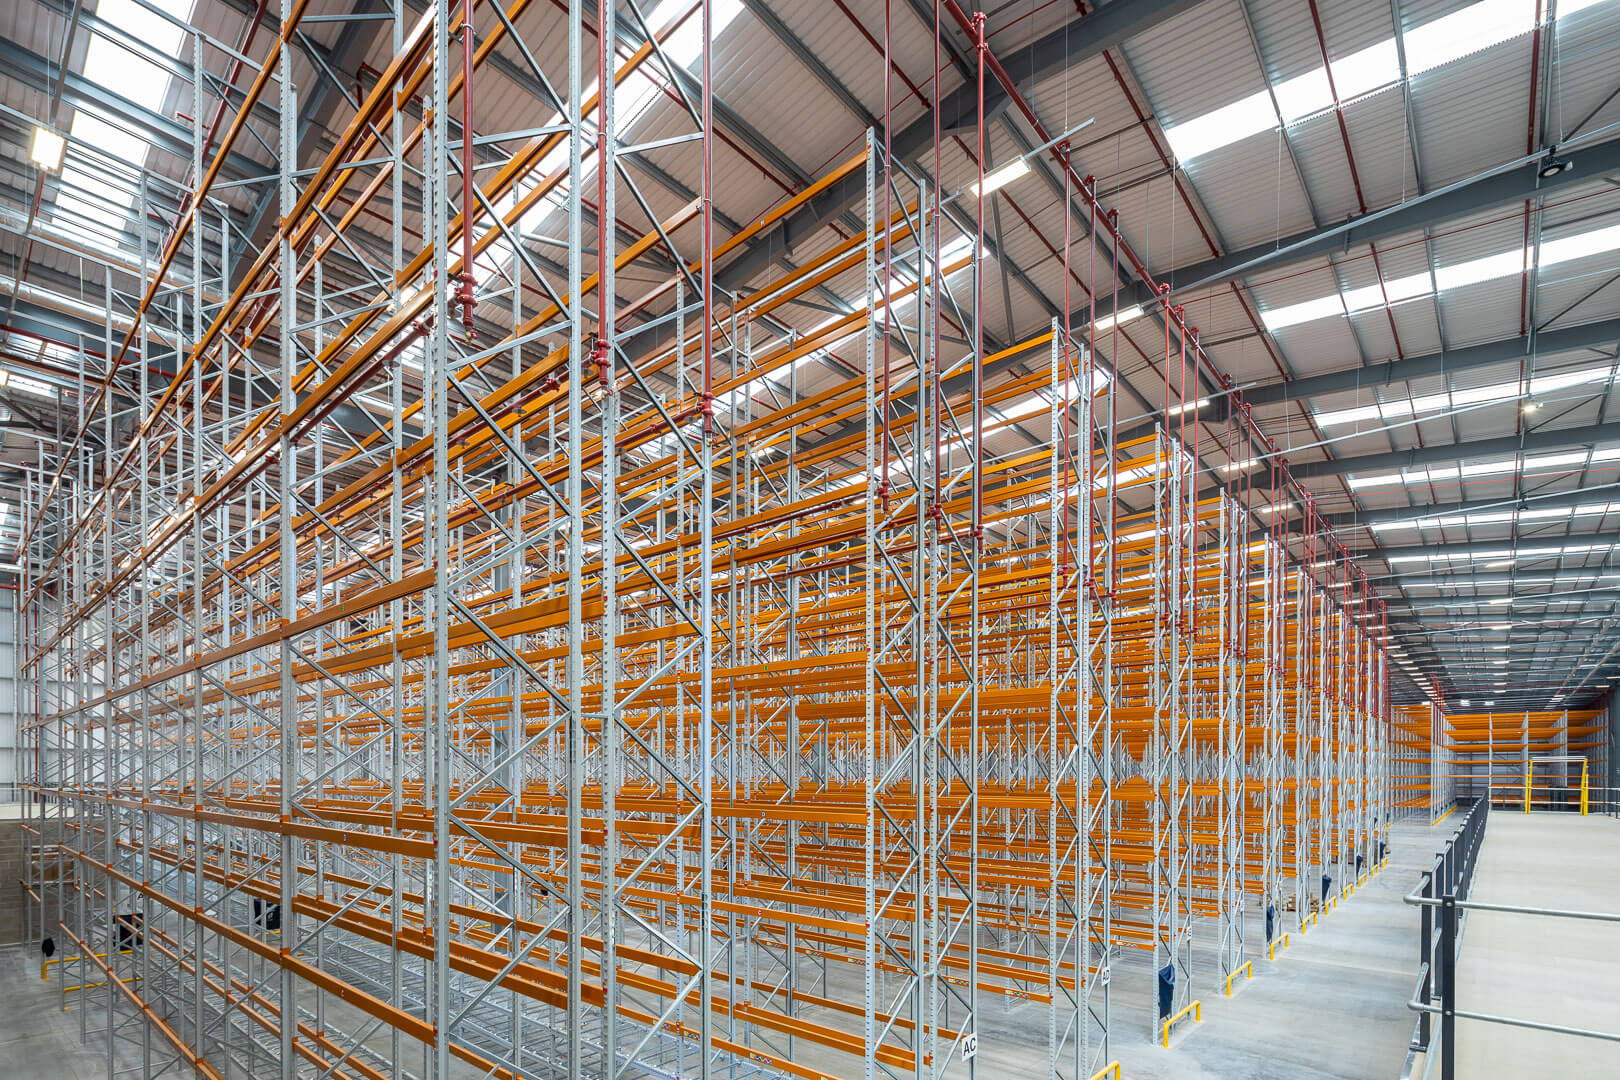 Interior photography of 136 Irlam industrial distribution centre, Manchester